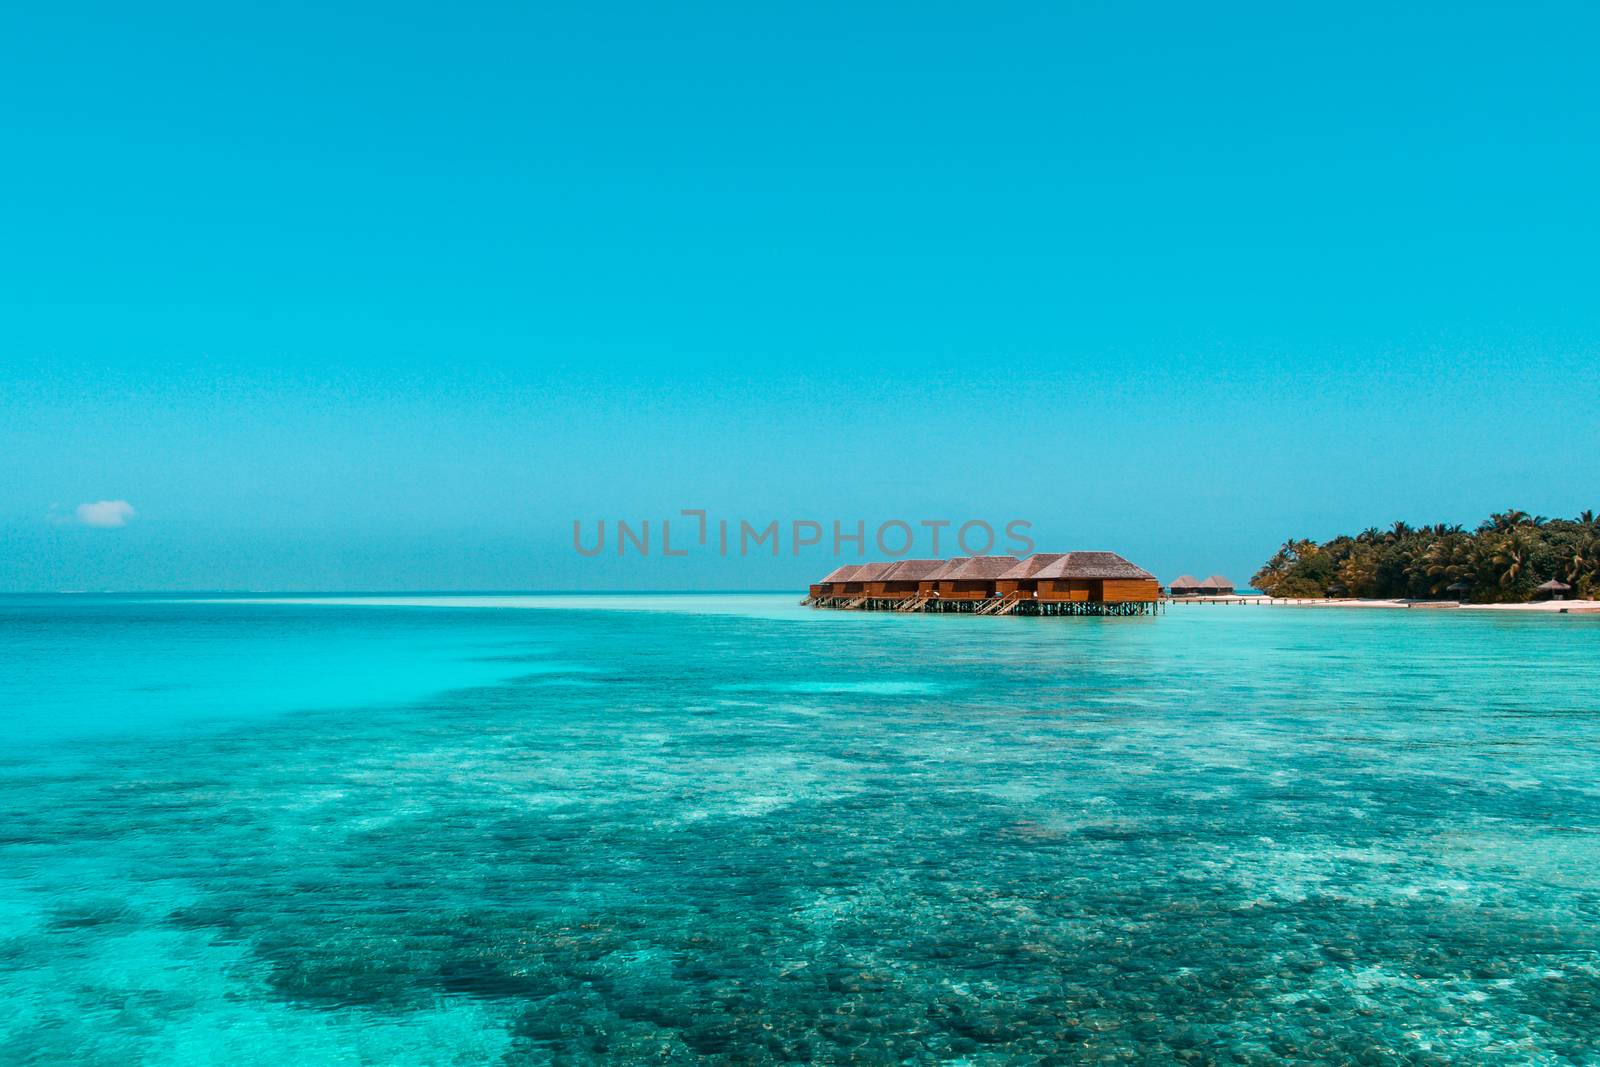 Beautiful beach with water bungalows or water villas at Maldives